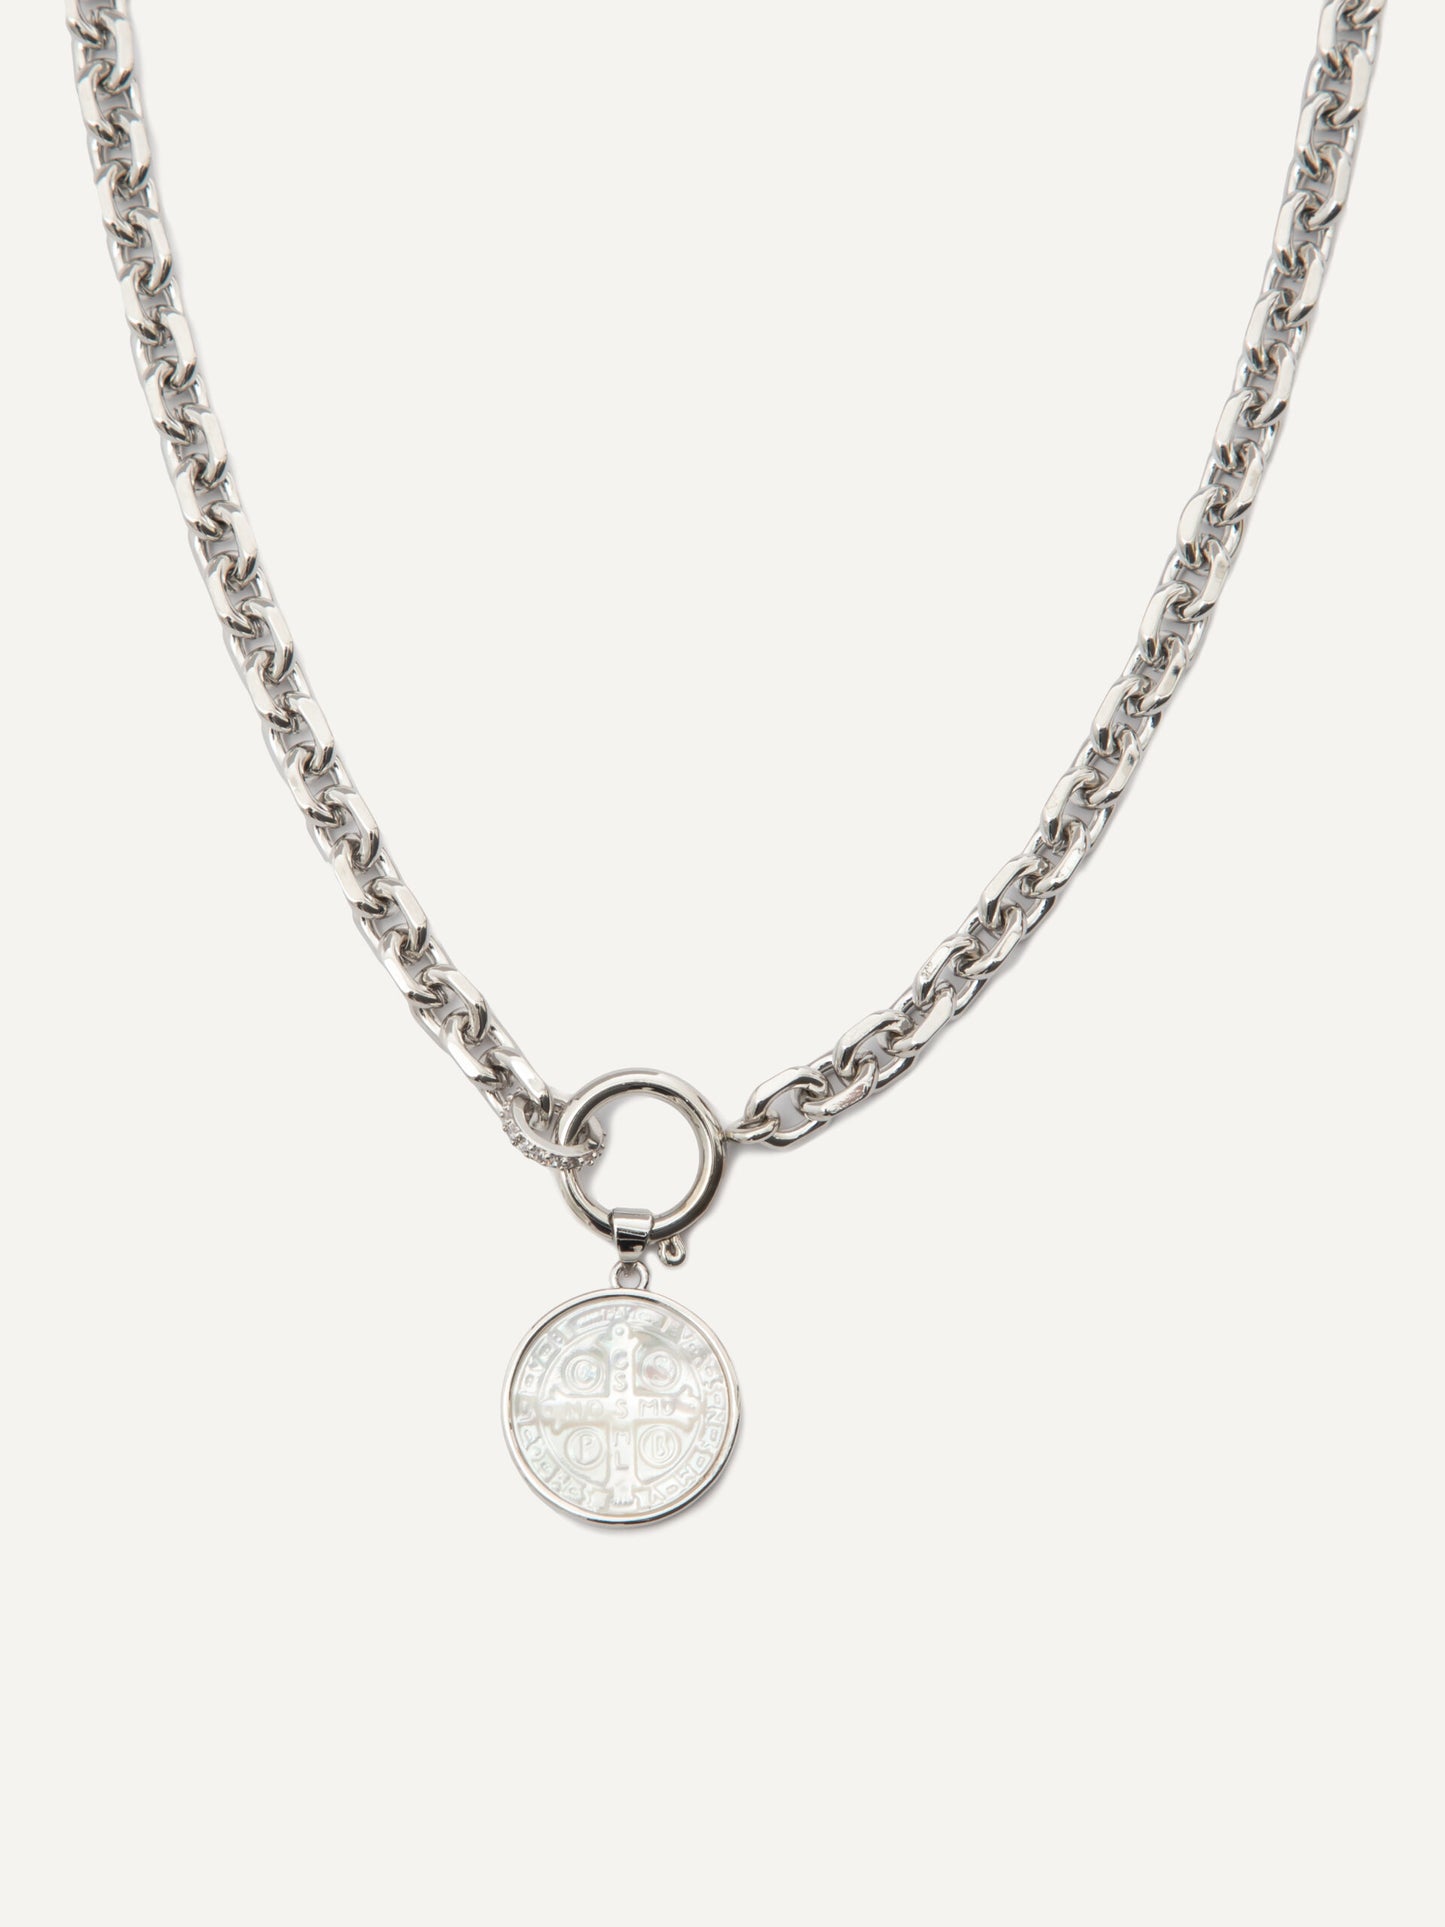 HOPE Necklace in Silver